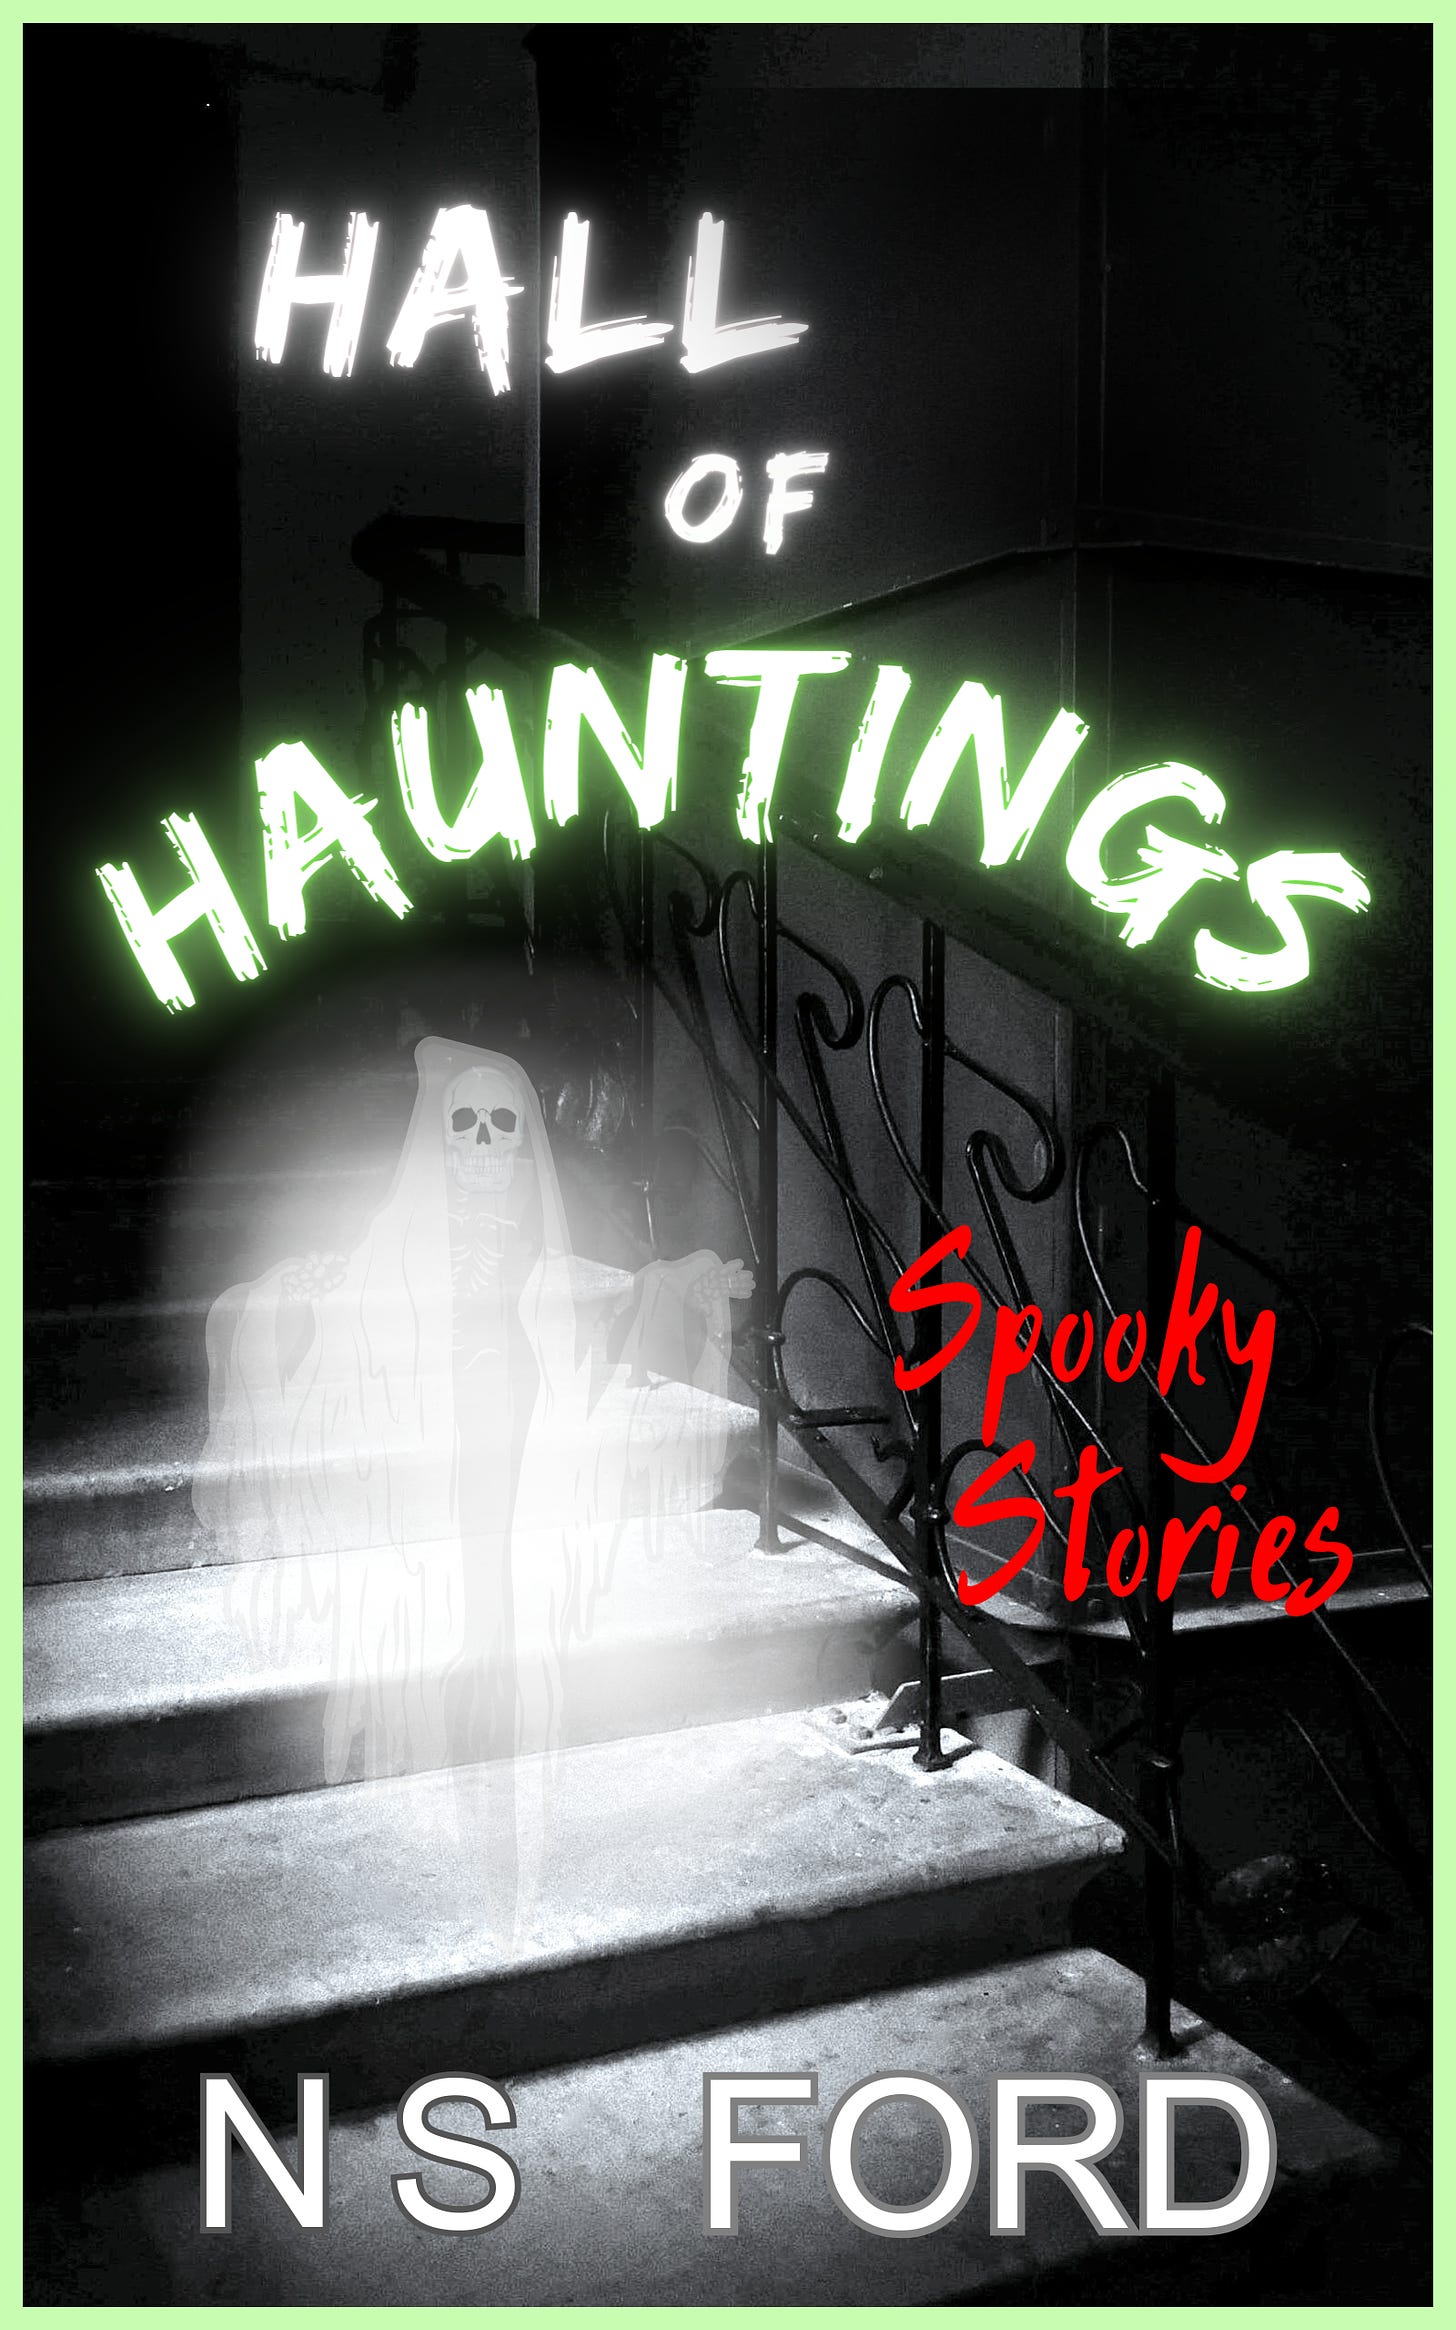 Hall of Hauntings by N S Ford, showing scary cover of a staircase and glowing ghost.